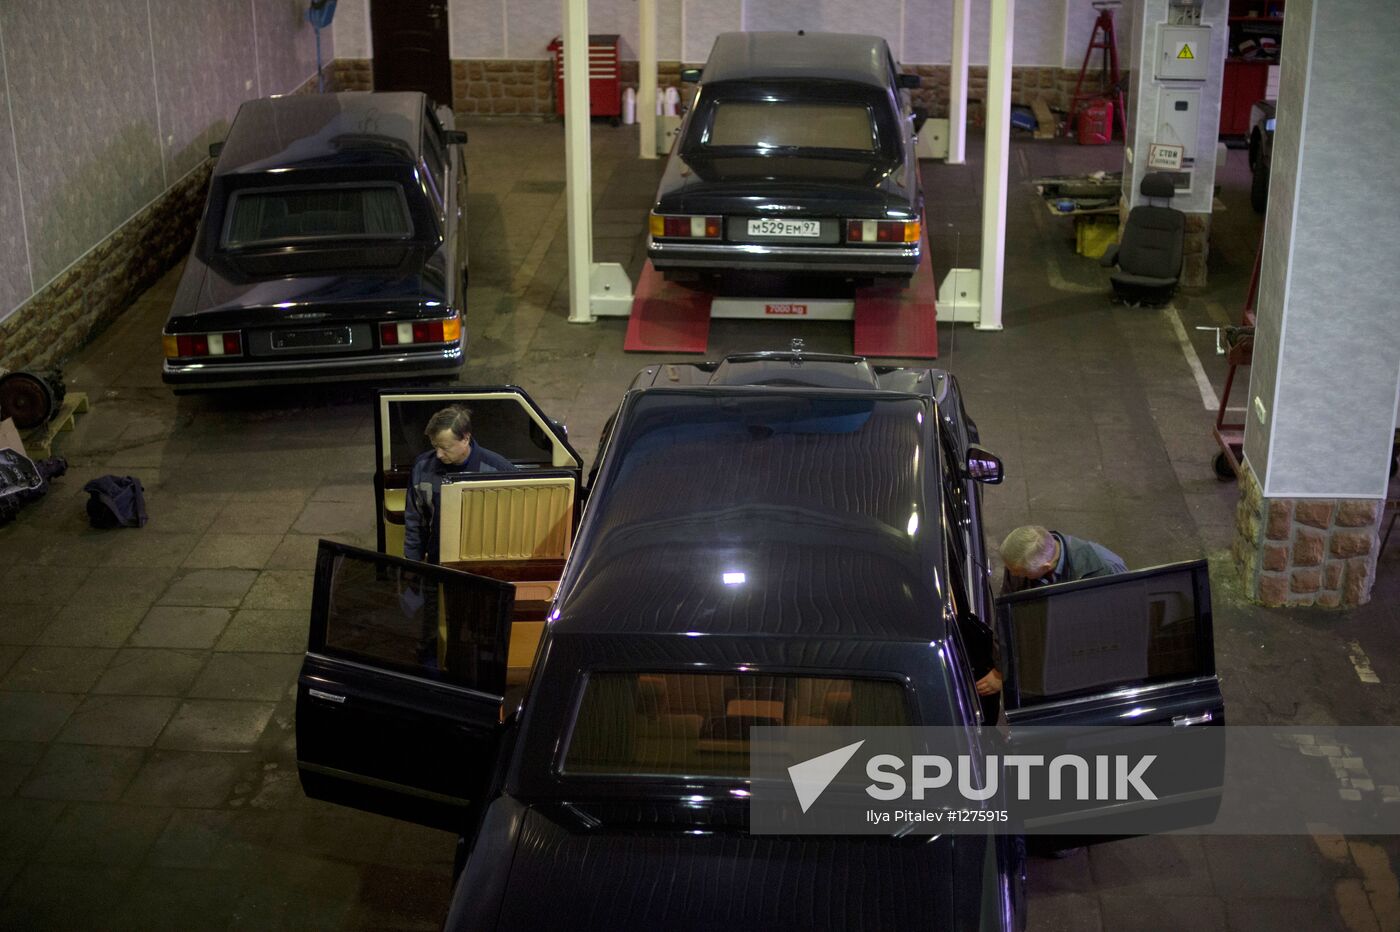 Manufacture of limousines at AMO ZiL factory